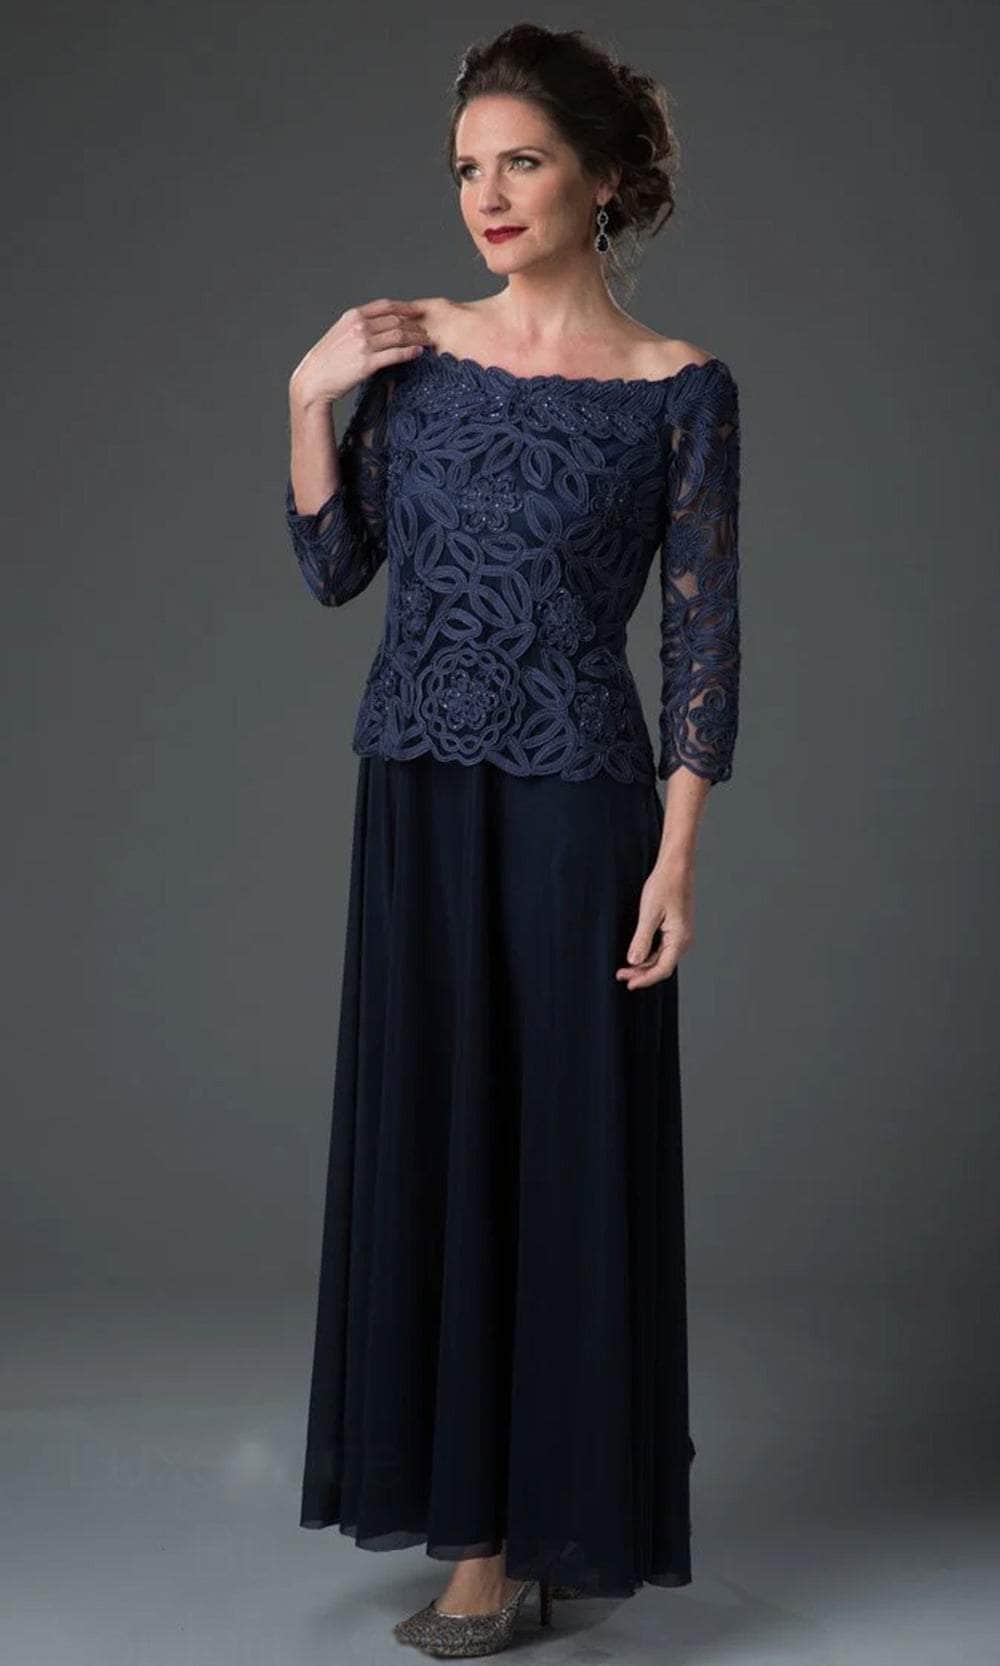 Plus Size Chiffon Lace Evening Dresses With Sleeves With V Neck, 3/4 Sleeves,  Ruffles, And Empire Waist 2020 Prom & Party Gown From Hxhdress, $125.73 |  DHgate.Com